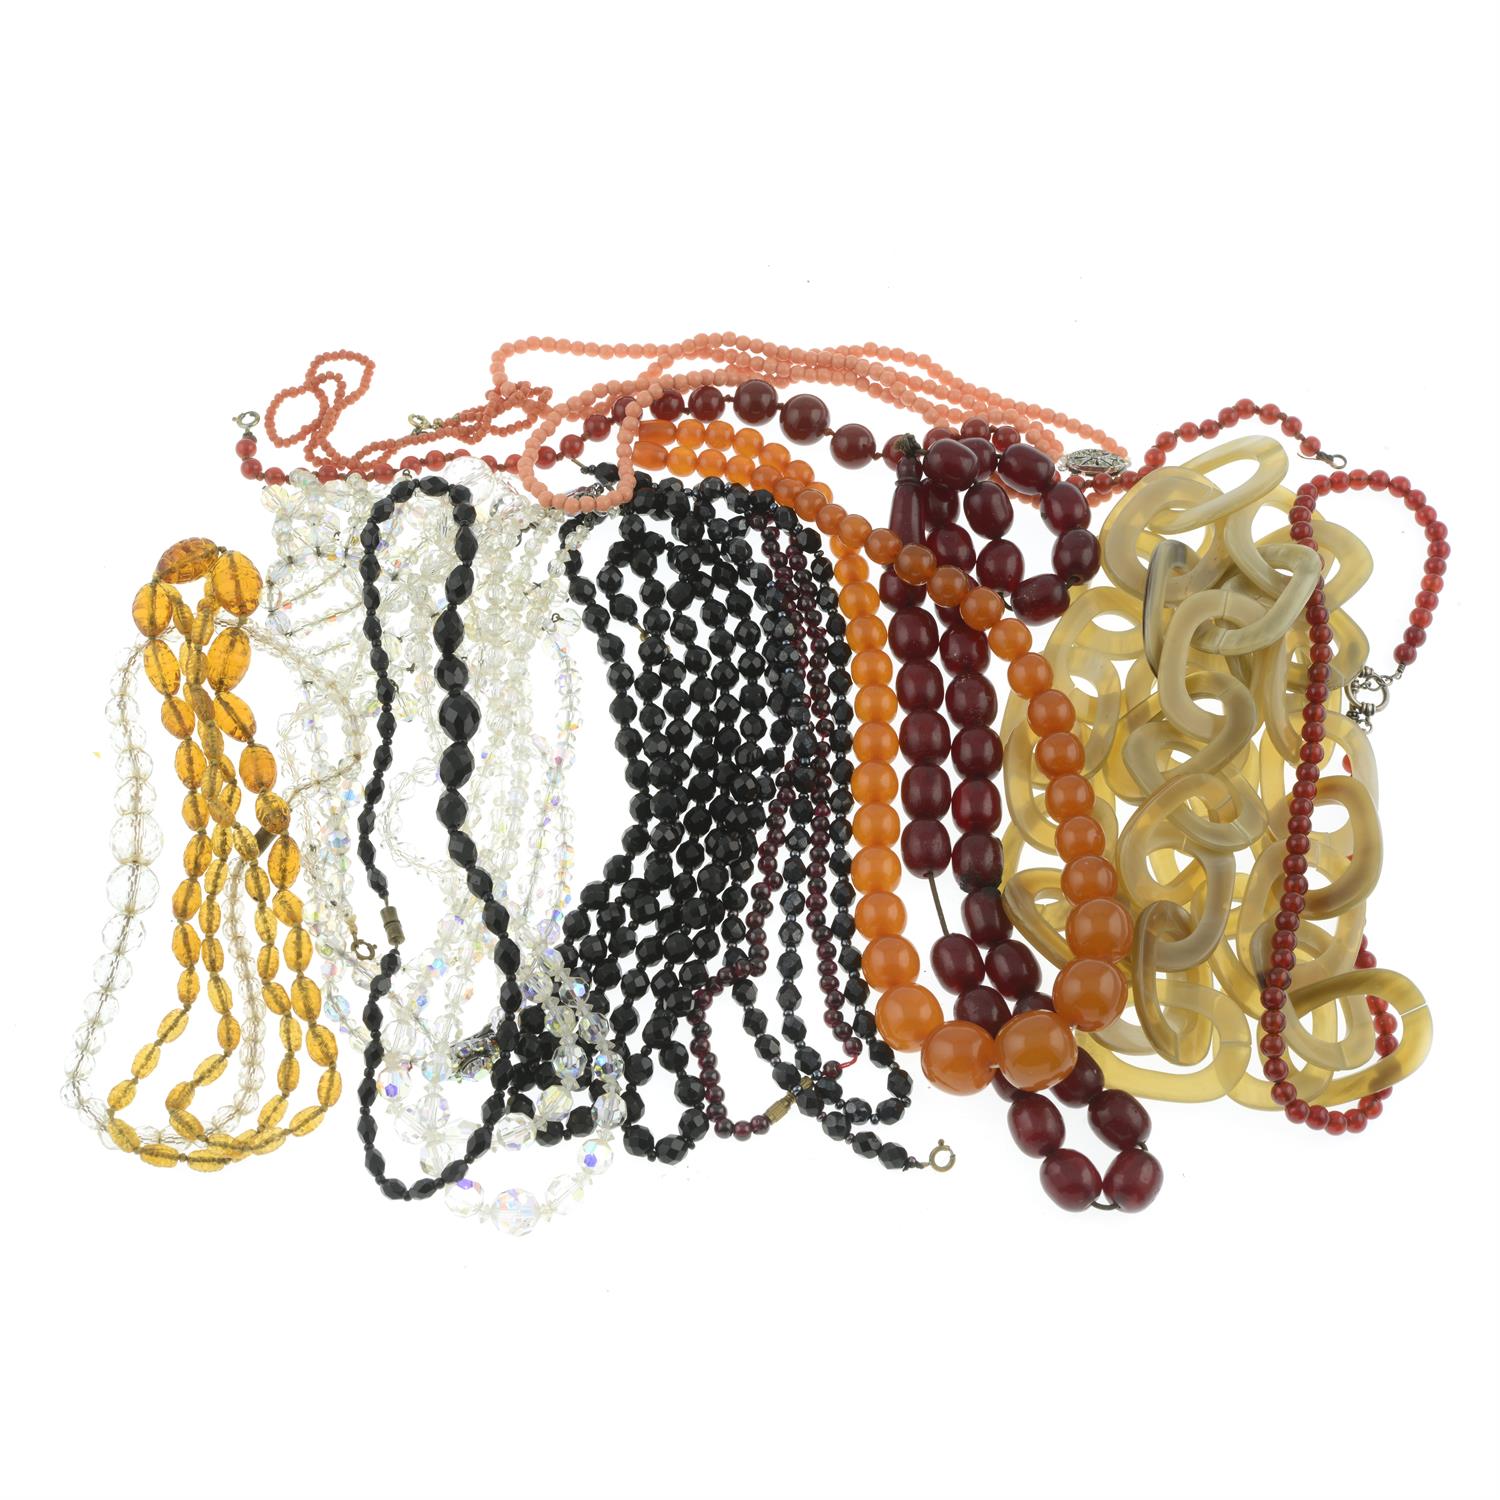 Assorted bead necklaces